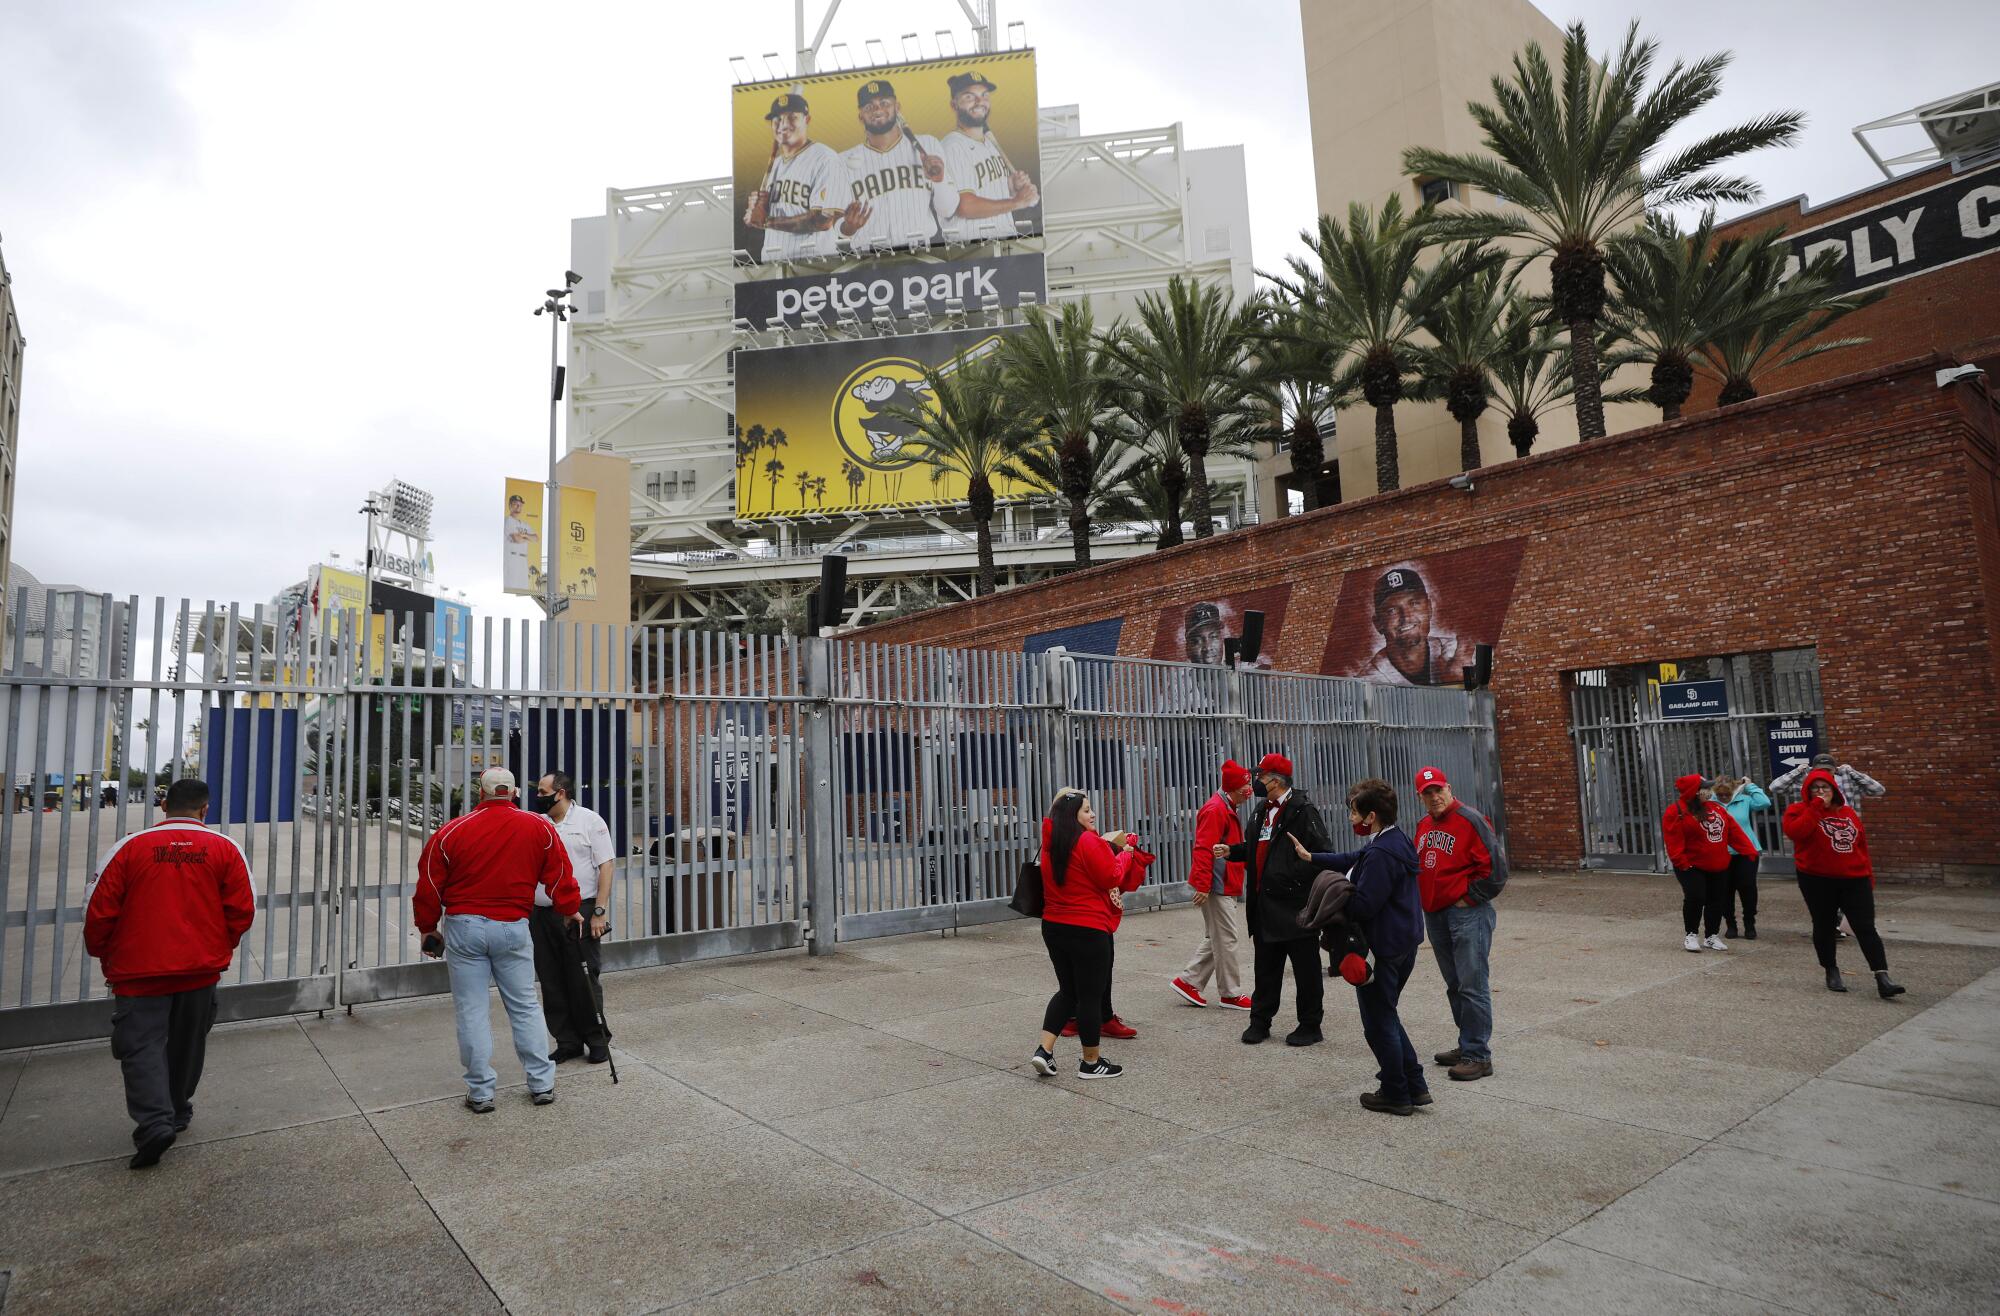 Some fans arrived at Petco Park unaware the Holiday Bowl between North Carolina State and UCLA was canceled.